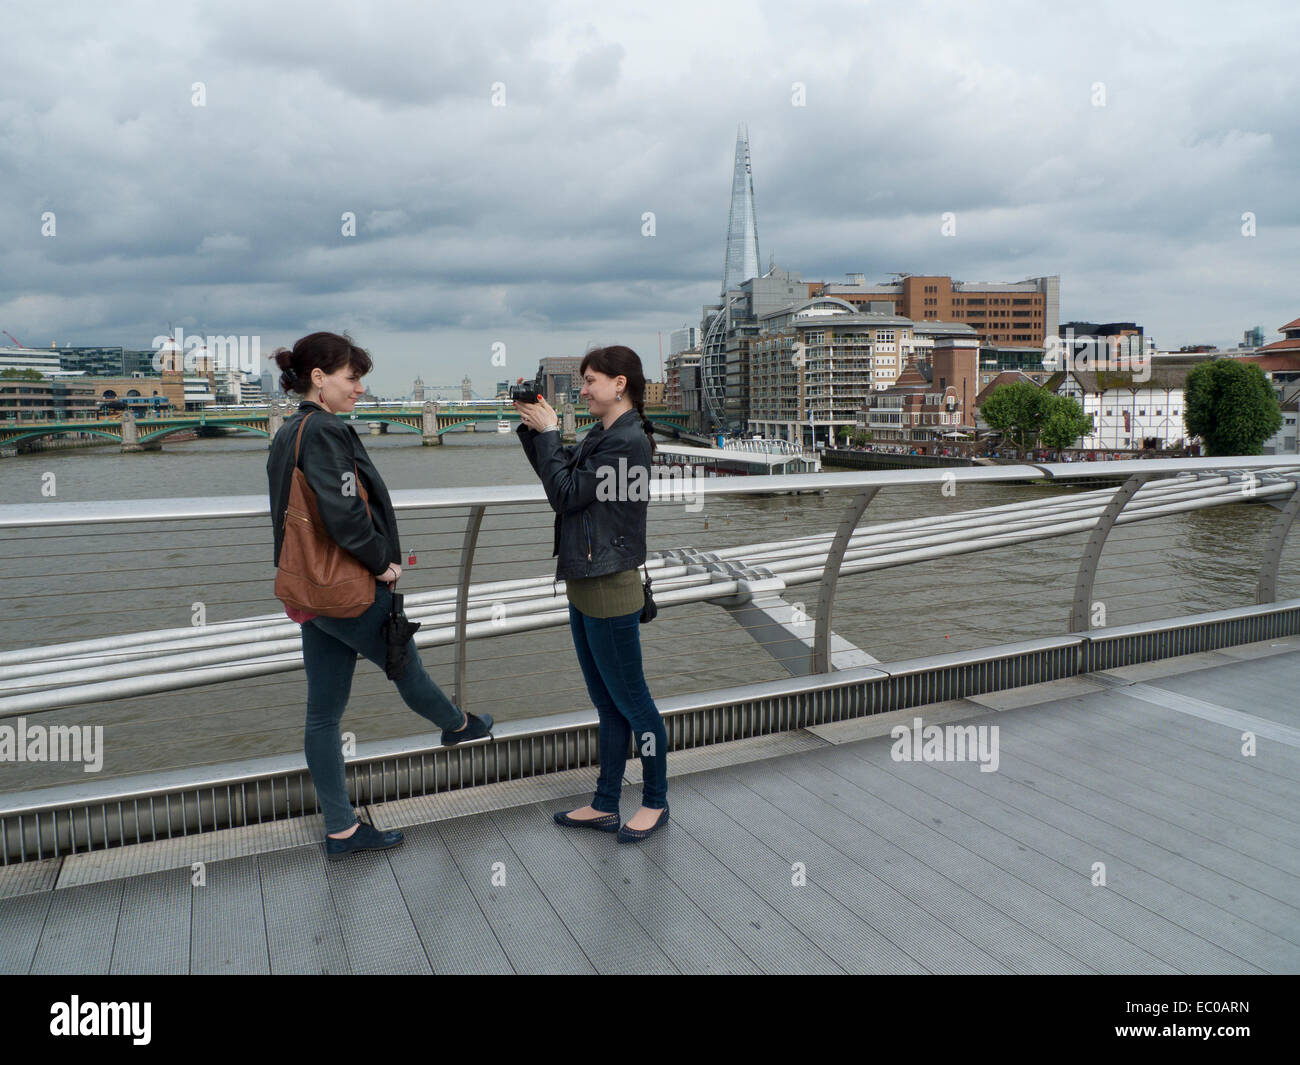 A young woman photographing her friend on the Millennium Bridge over the River Thames in London UK  KATHY DEWITT Stock Photo